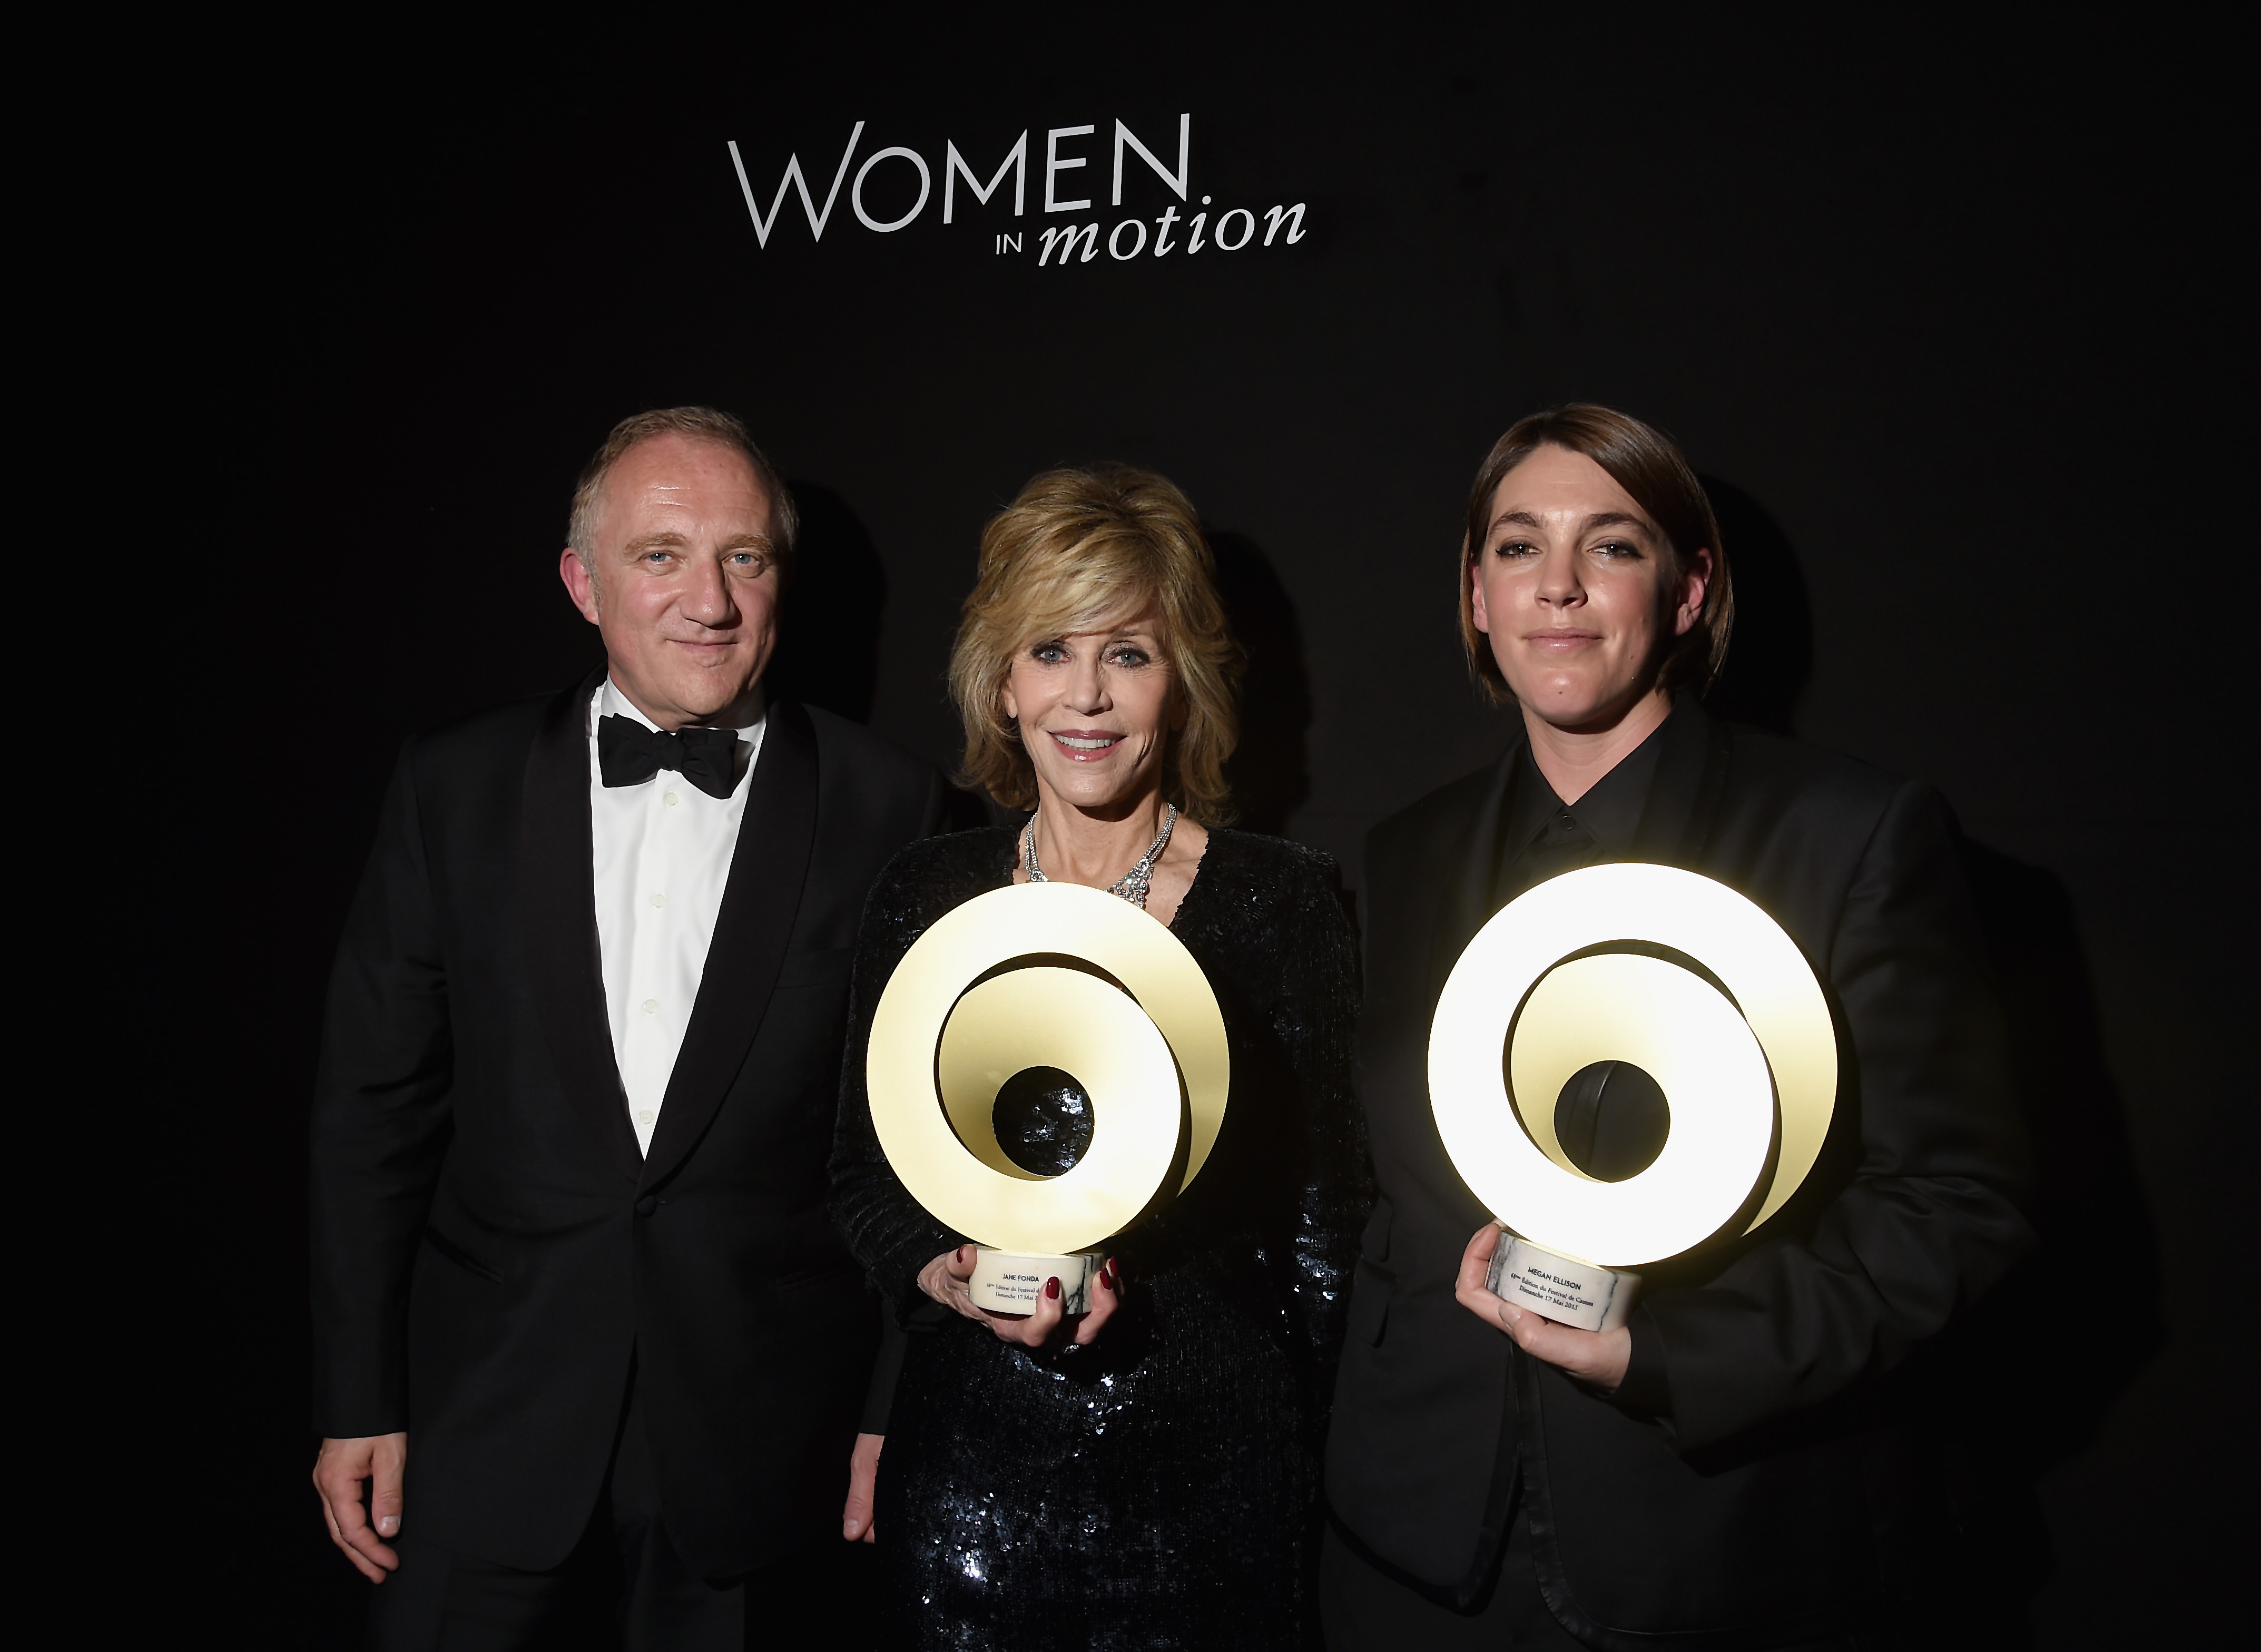 WOMEN IN MOTION: JANE FONDA AND MEGAN ELLISON ARE HONORED IN CANNES